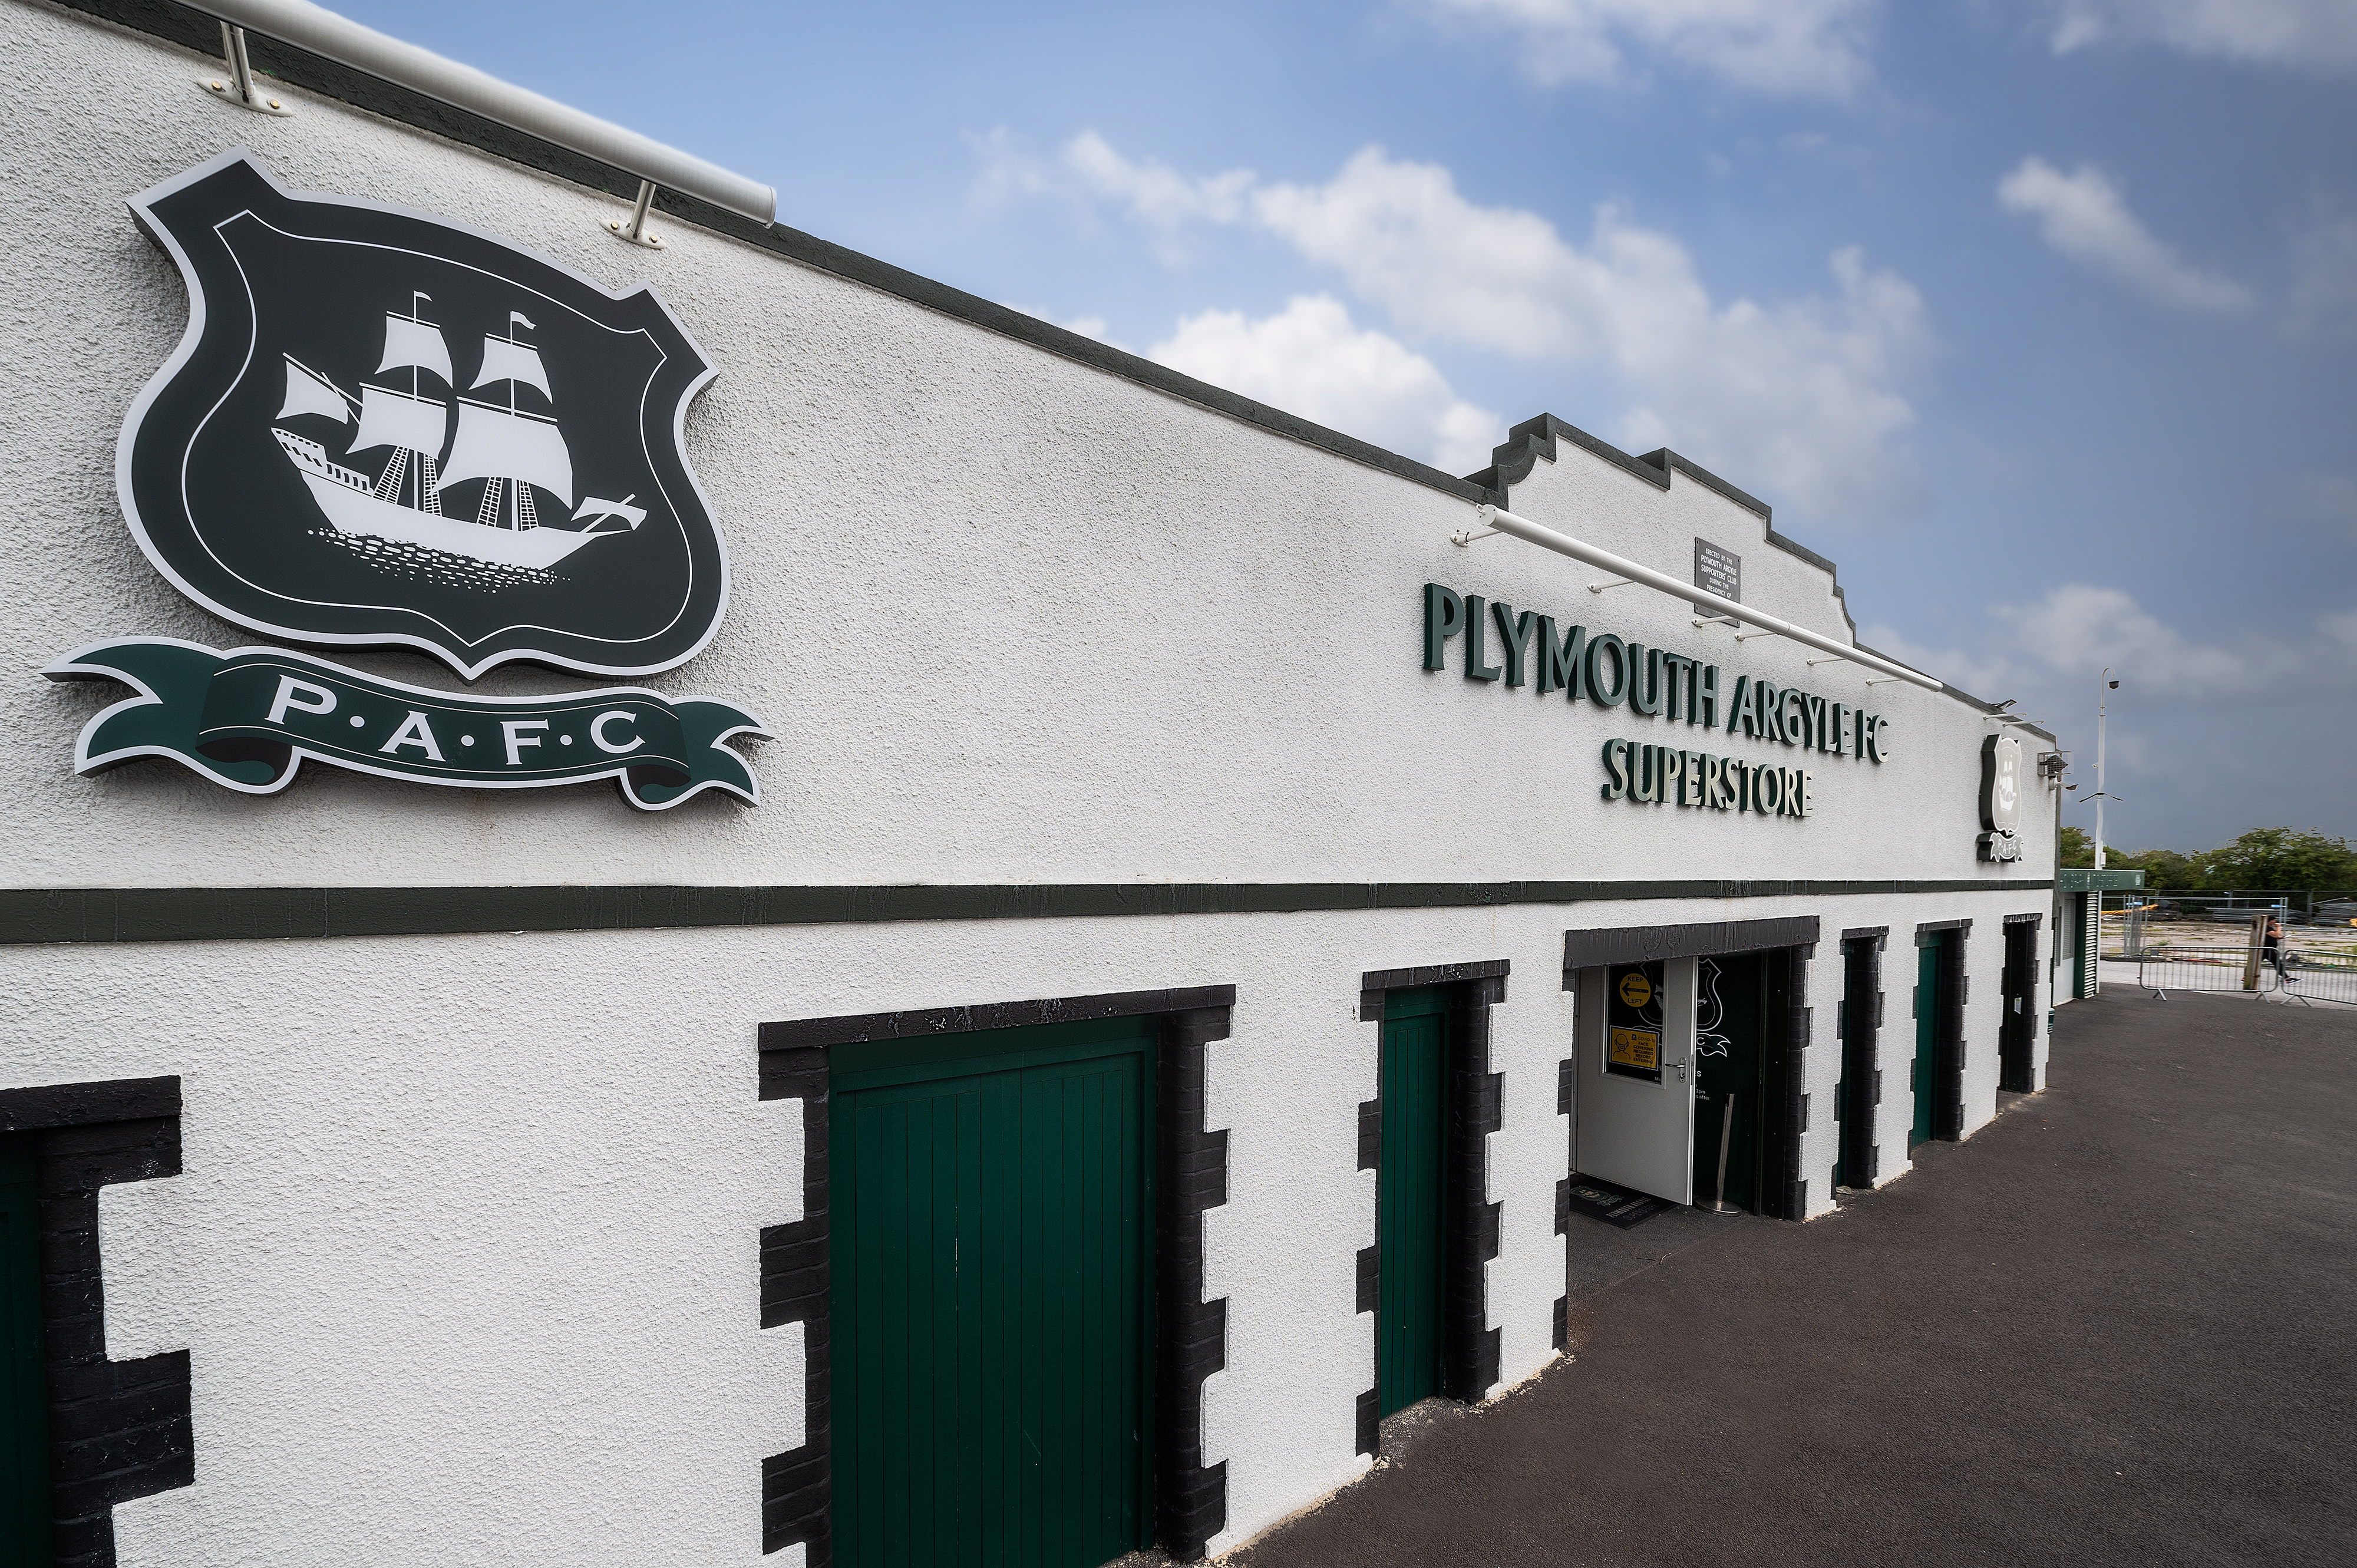 Home Park Superstore